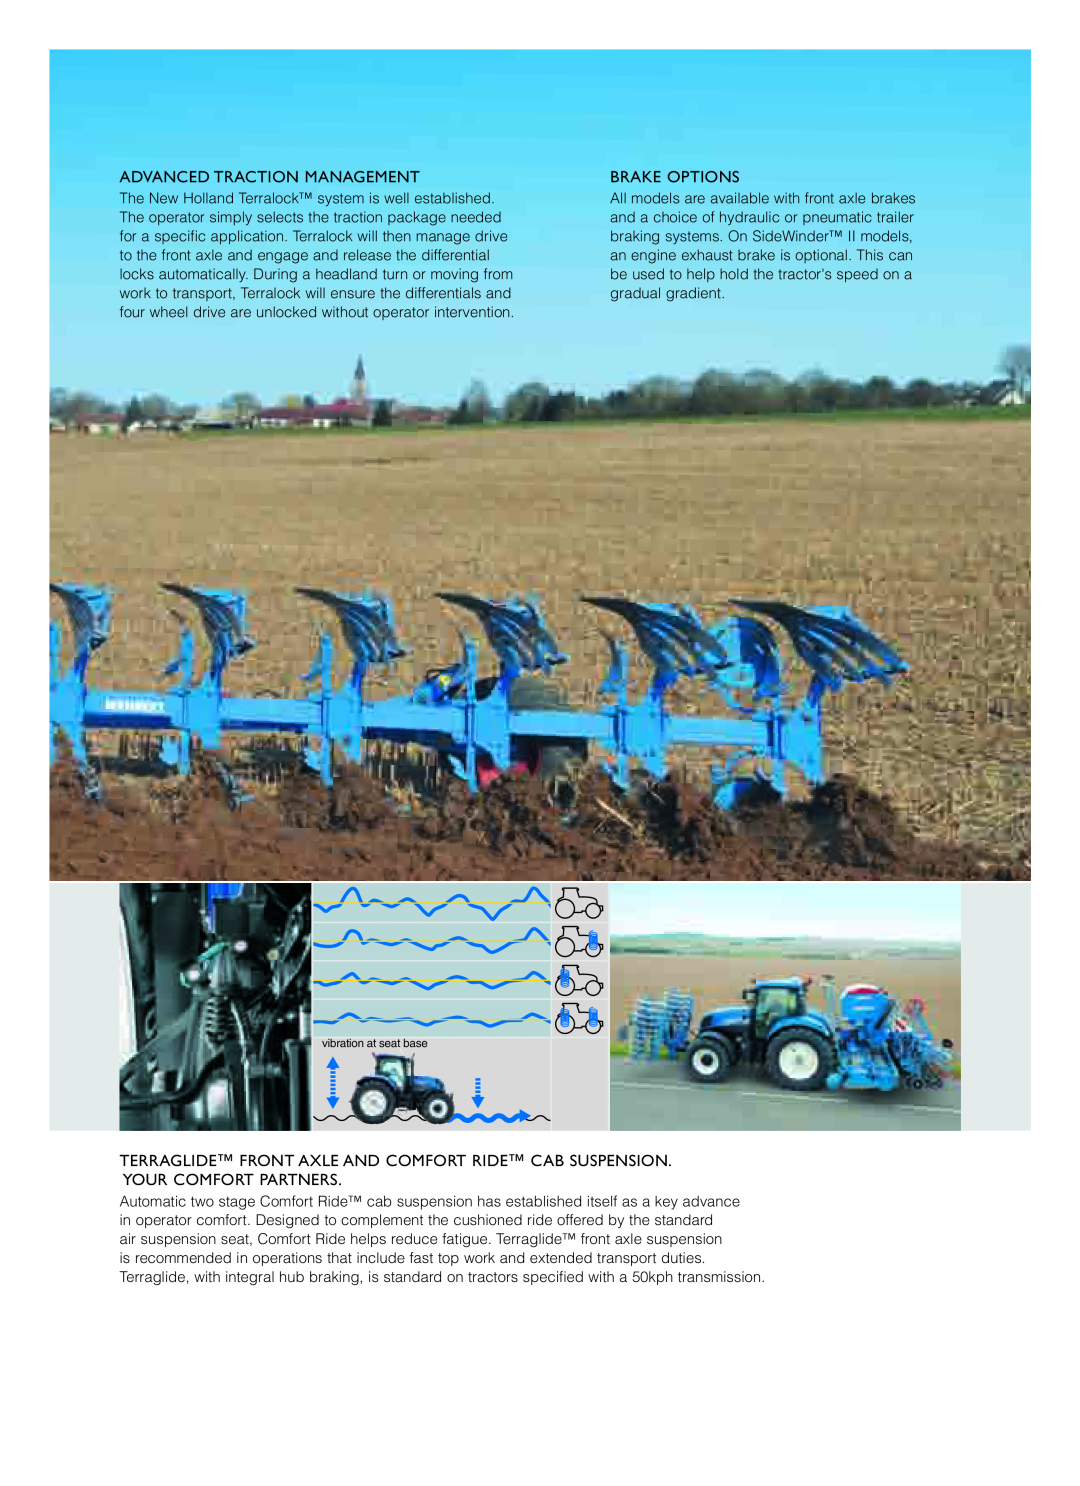 New Holland T7.260, T7.270, T7.185, T7.210, T7.235, T7.200 Advanced Traction Management, Brake Options, vibration at seat base 